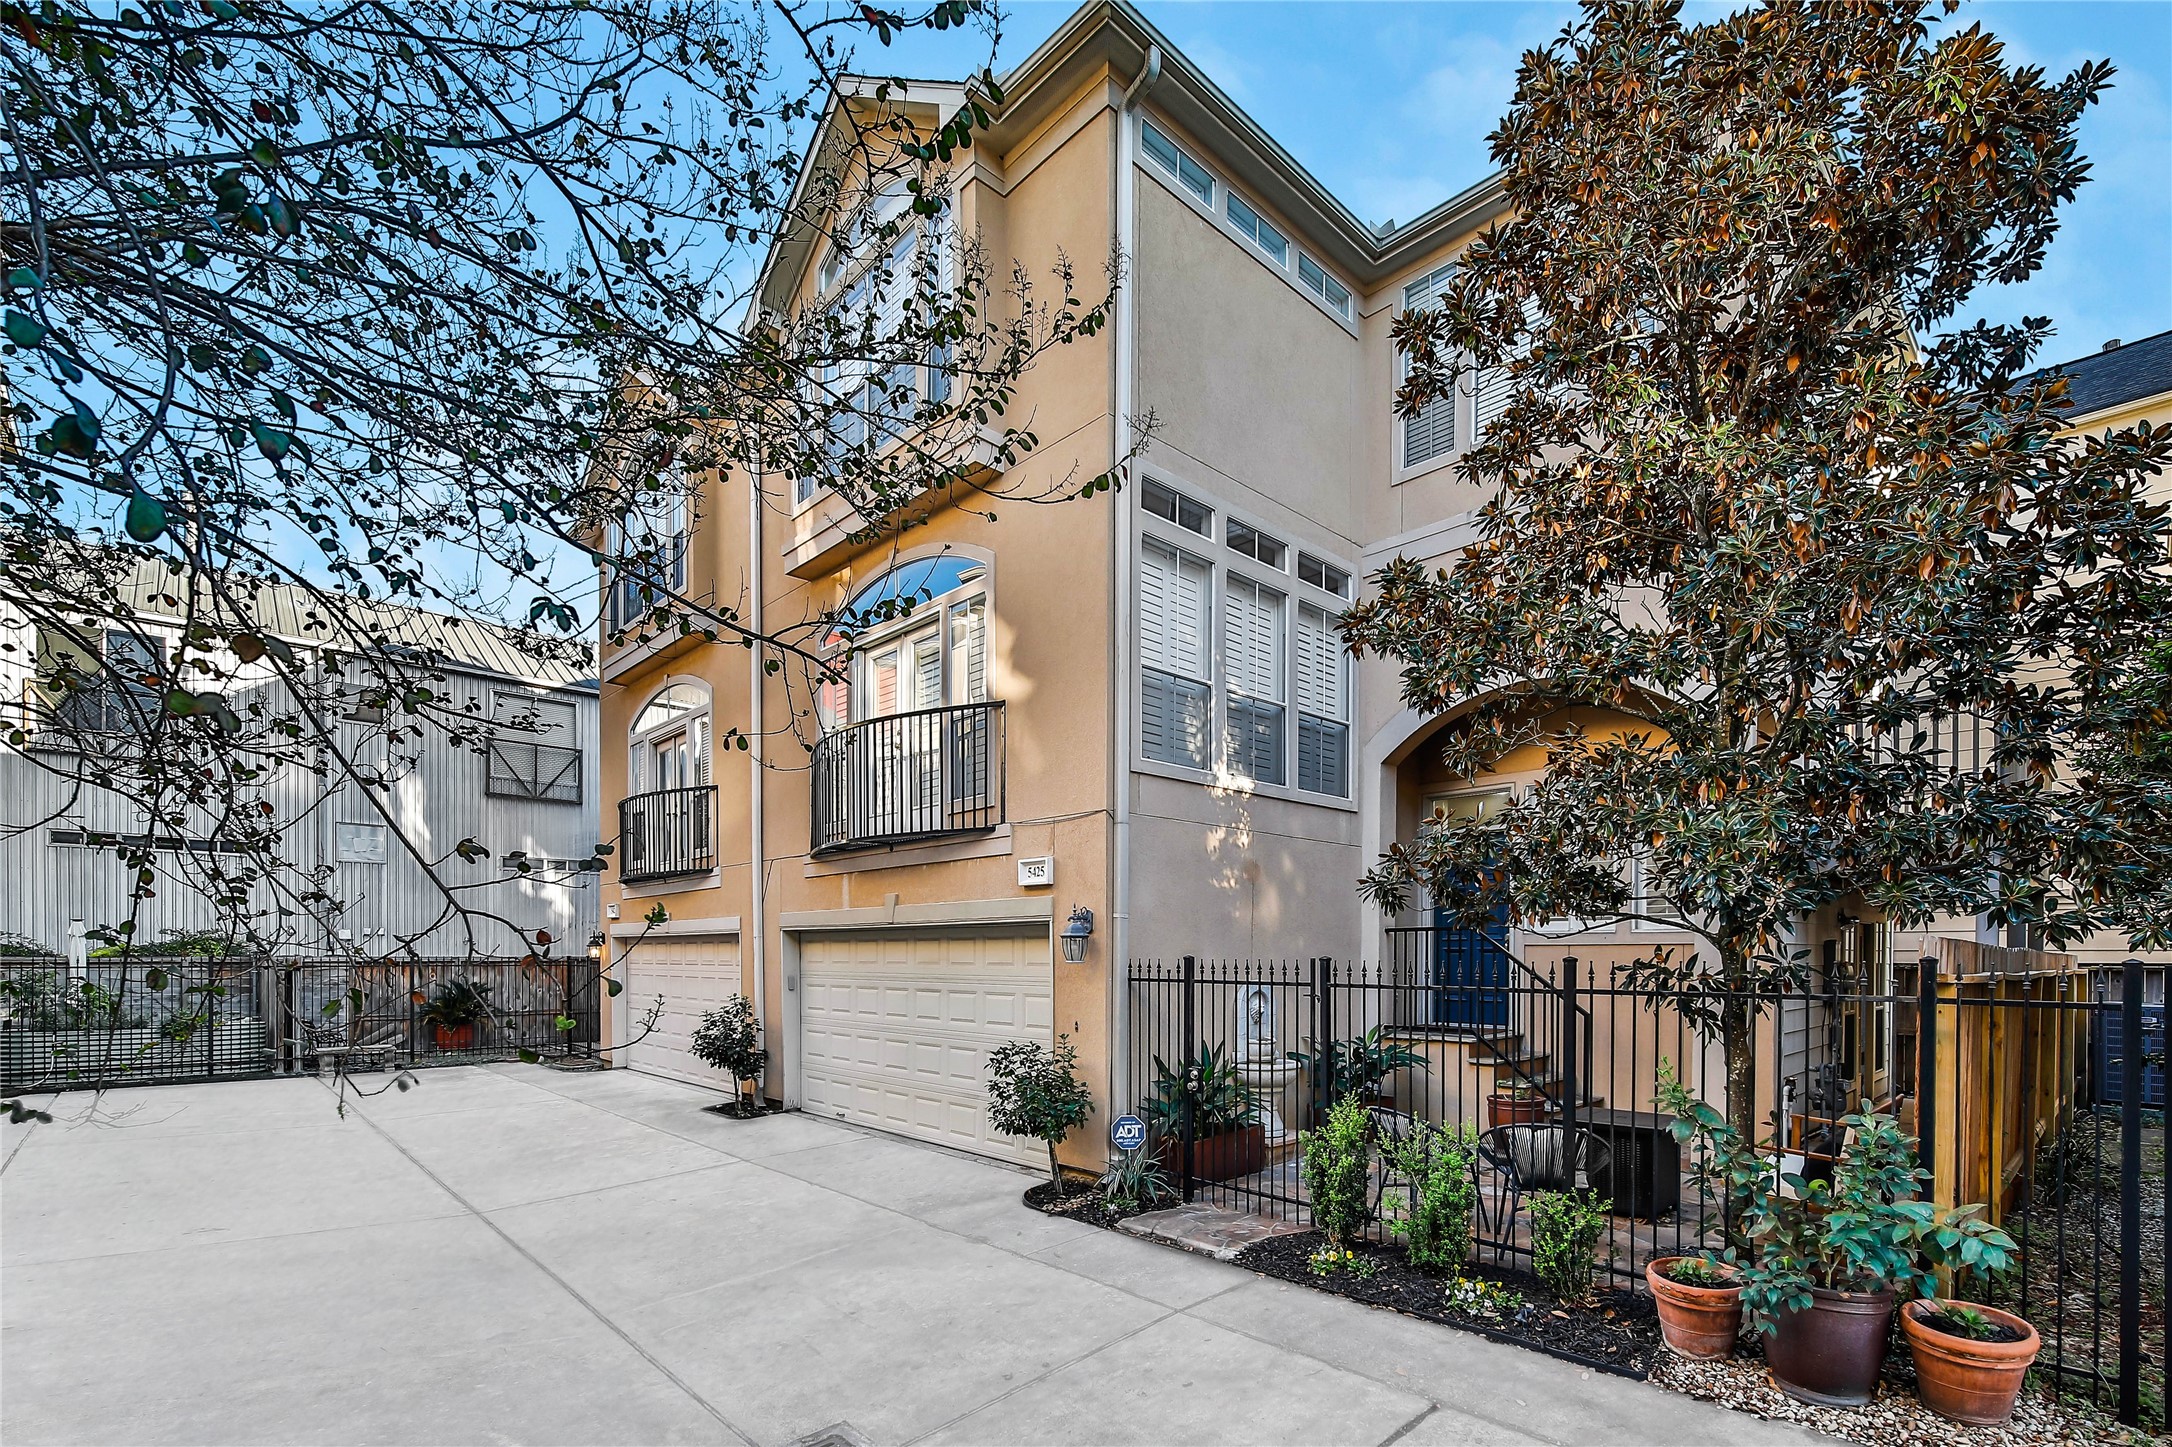 Welcome to 5425 Lillian Street, a stunning 3/2.5/2 townhome in the highly sought after Rice Military area!